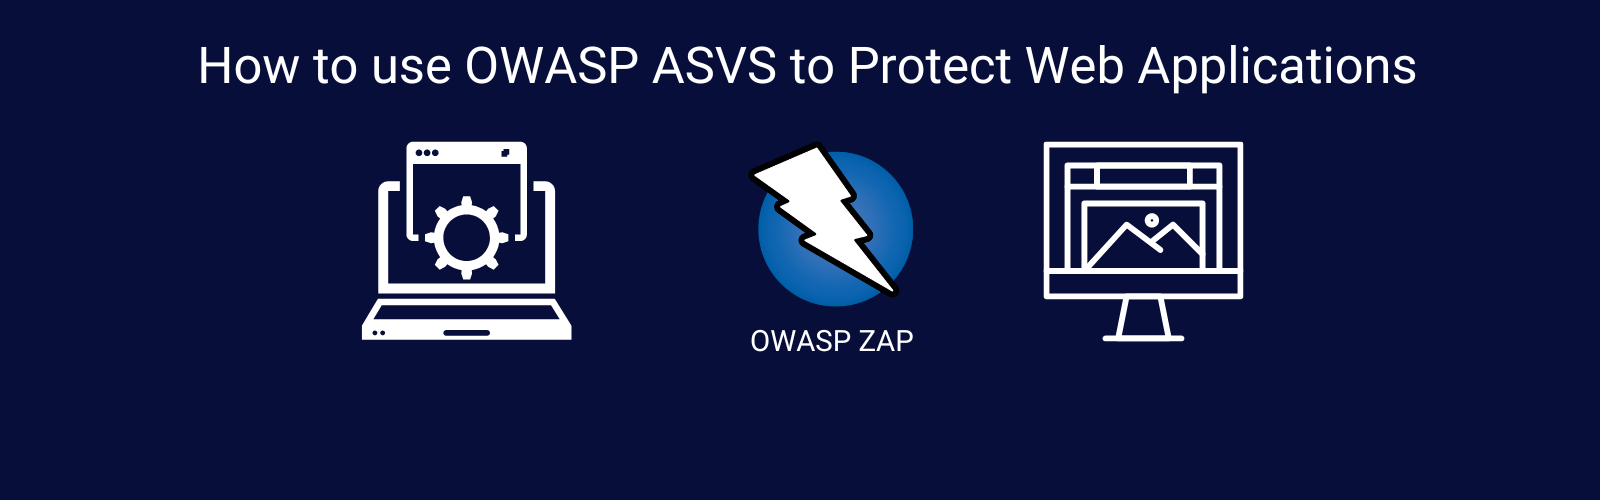 How to use OWASP ASVS to Protect Web Applications main image